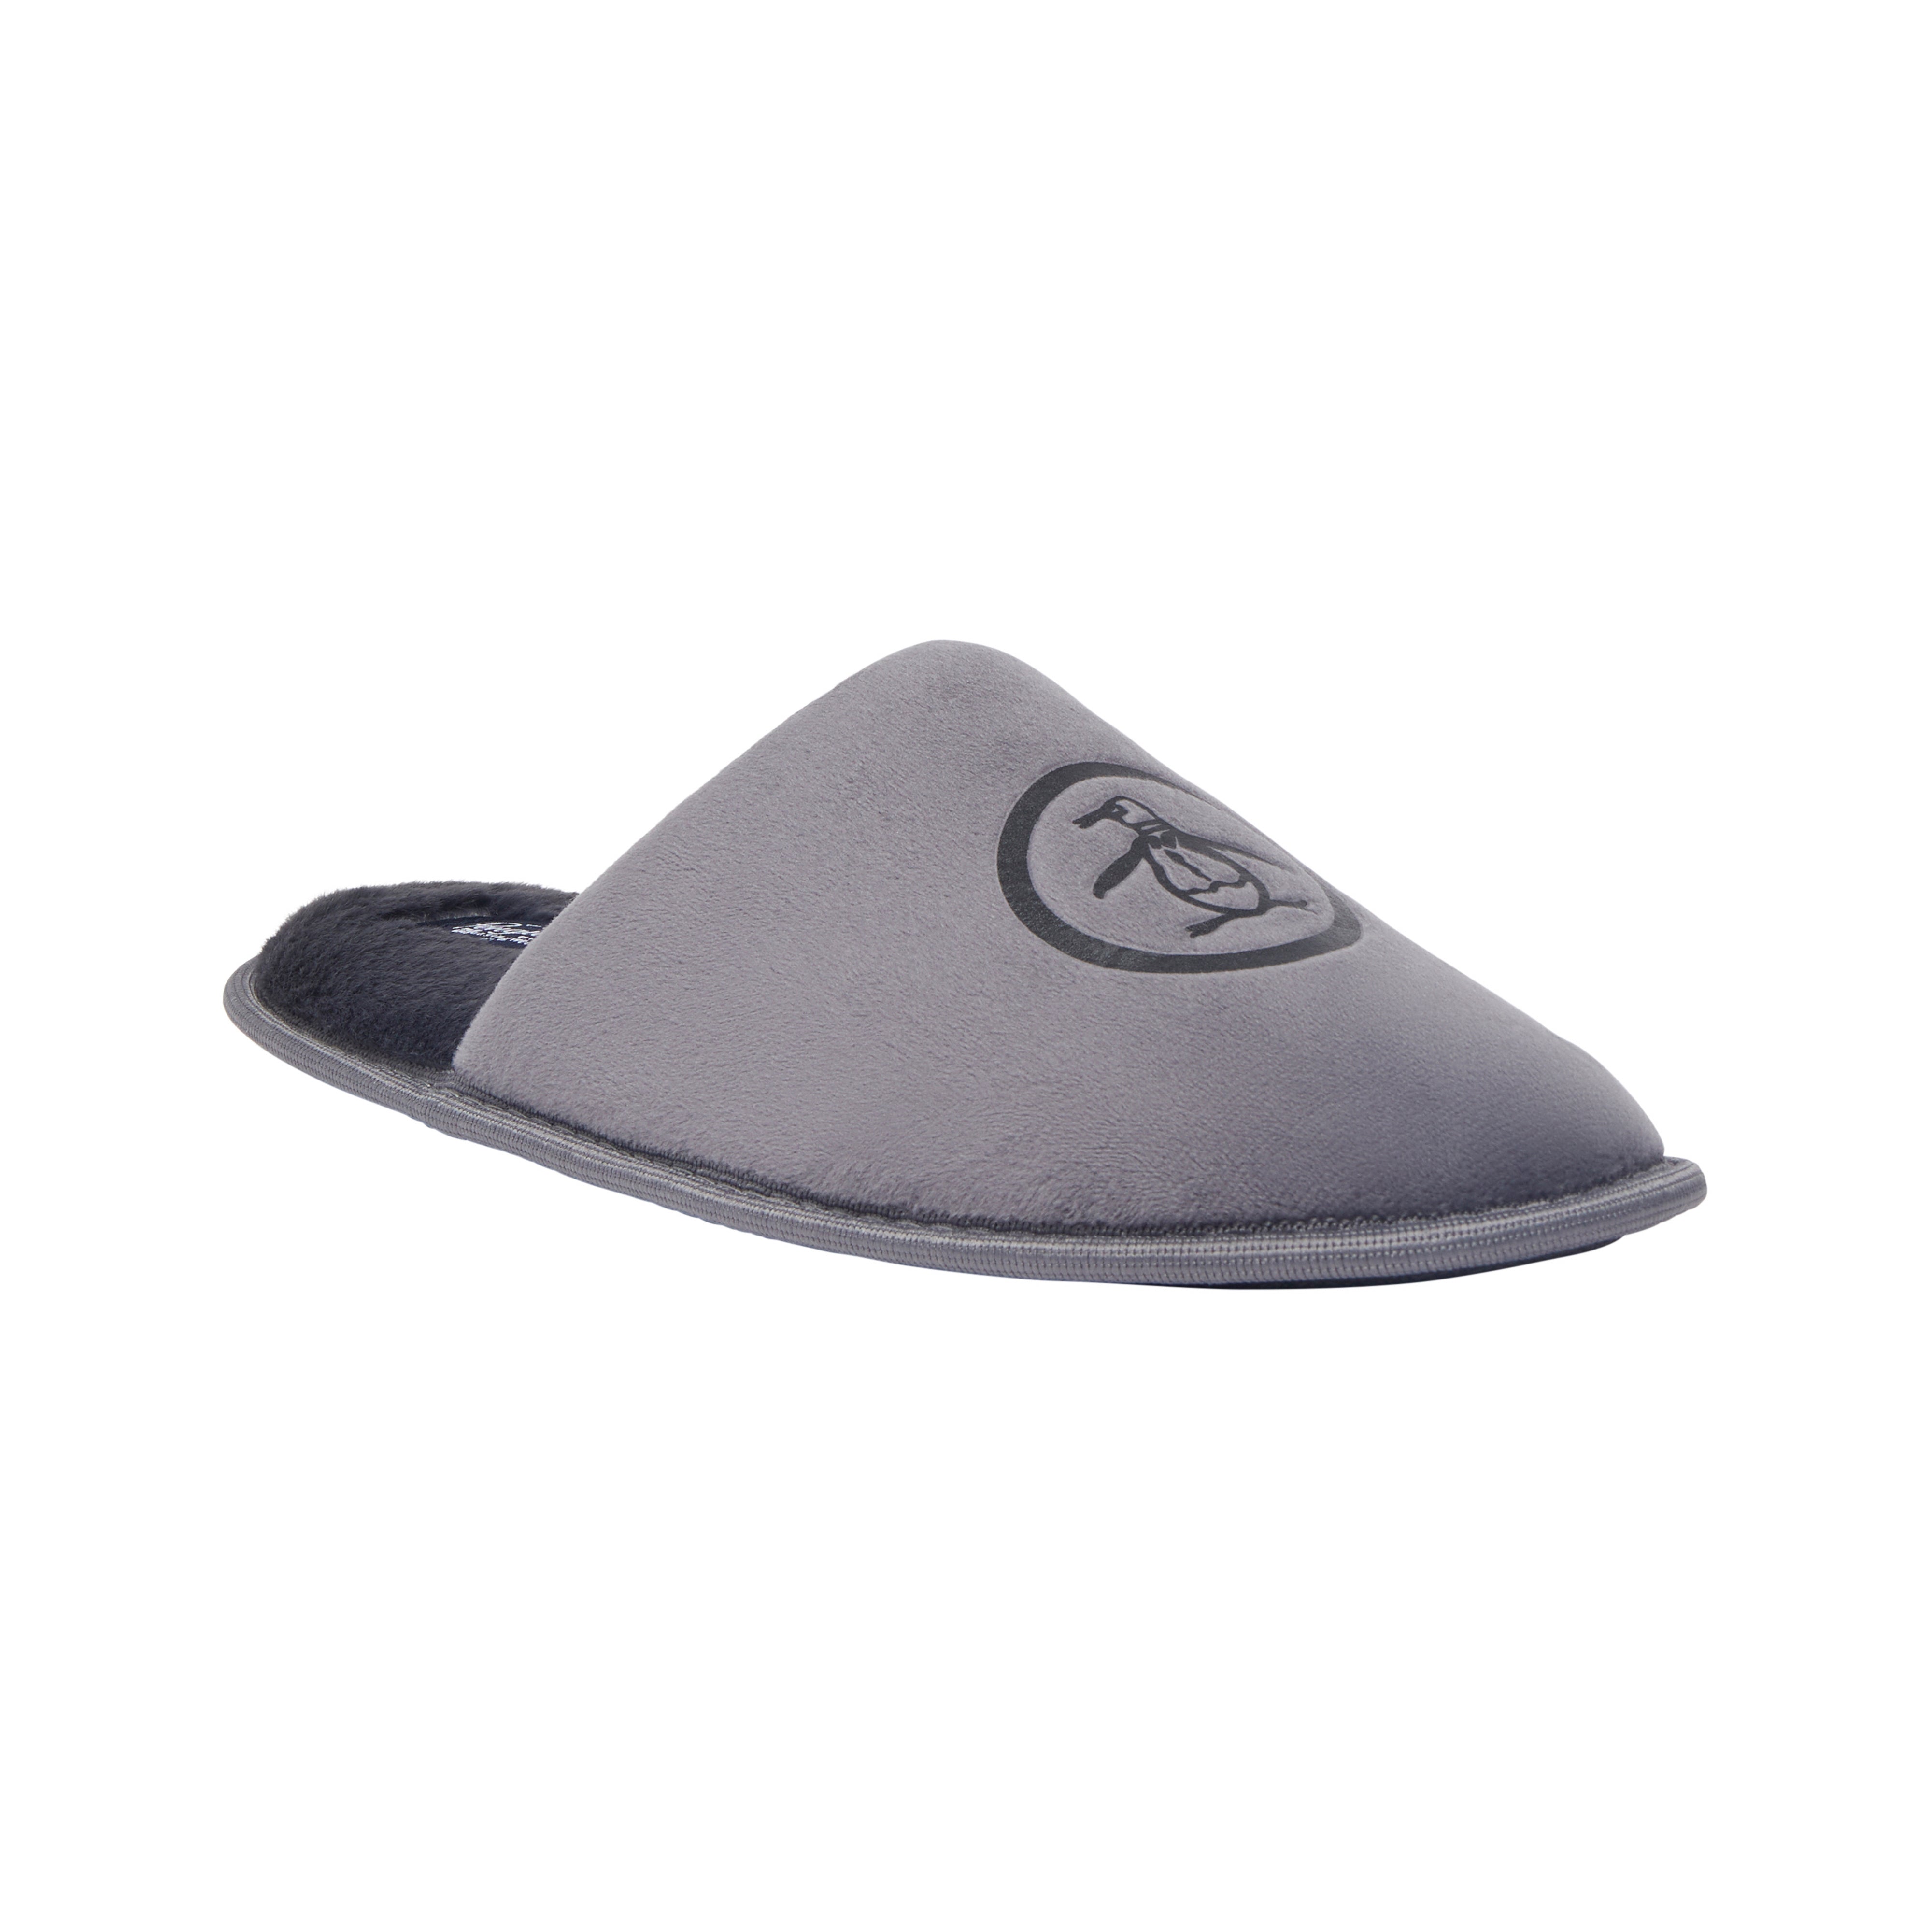 View Cozy Slipper In Charcoal Gray information